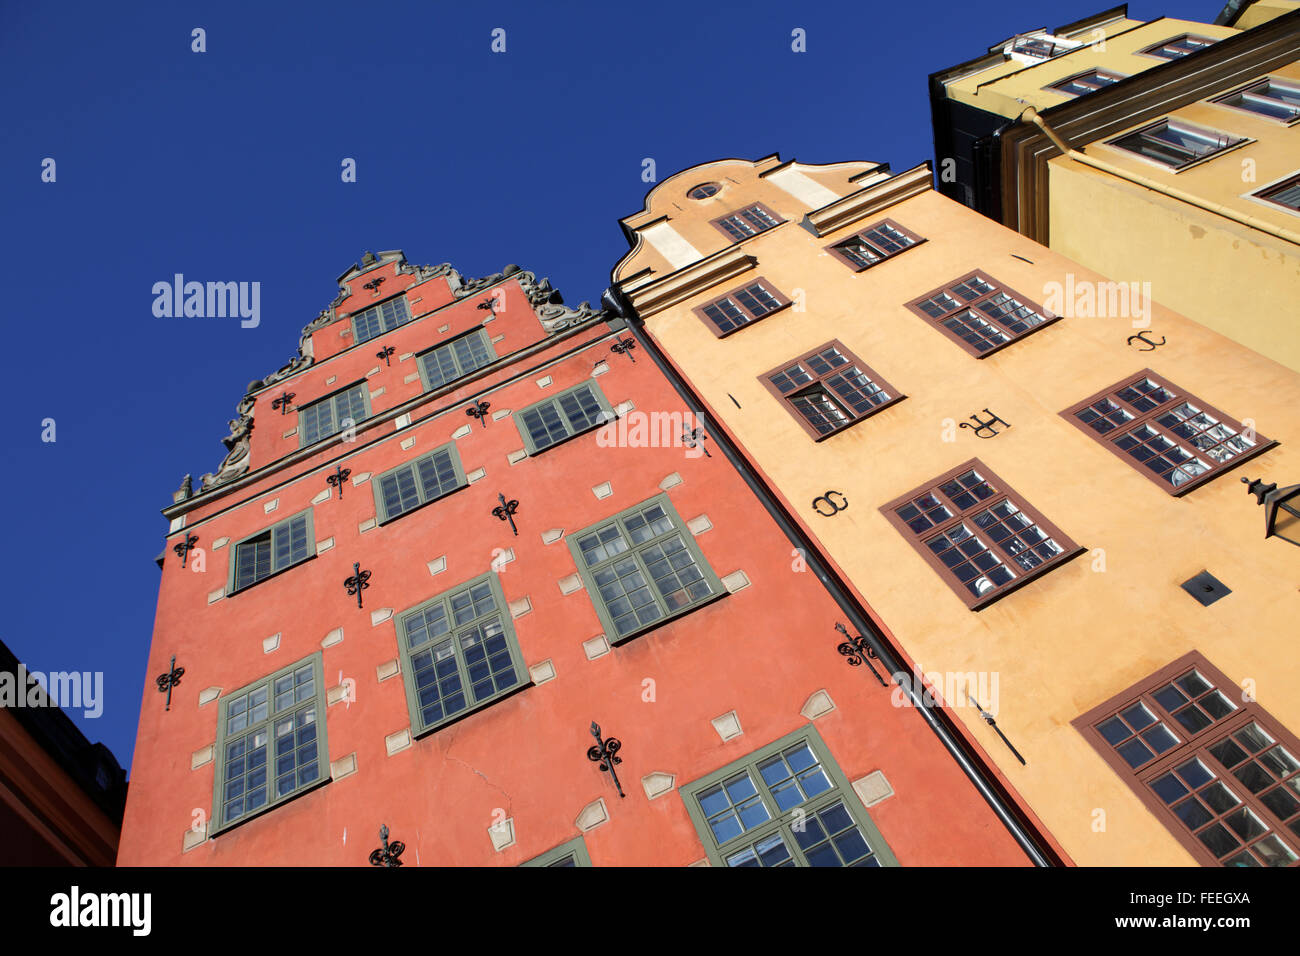 Buildings number 18 and 22 in Stortorget Square, Gamla Stan, Stockholm, Sweden Stock Photo